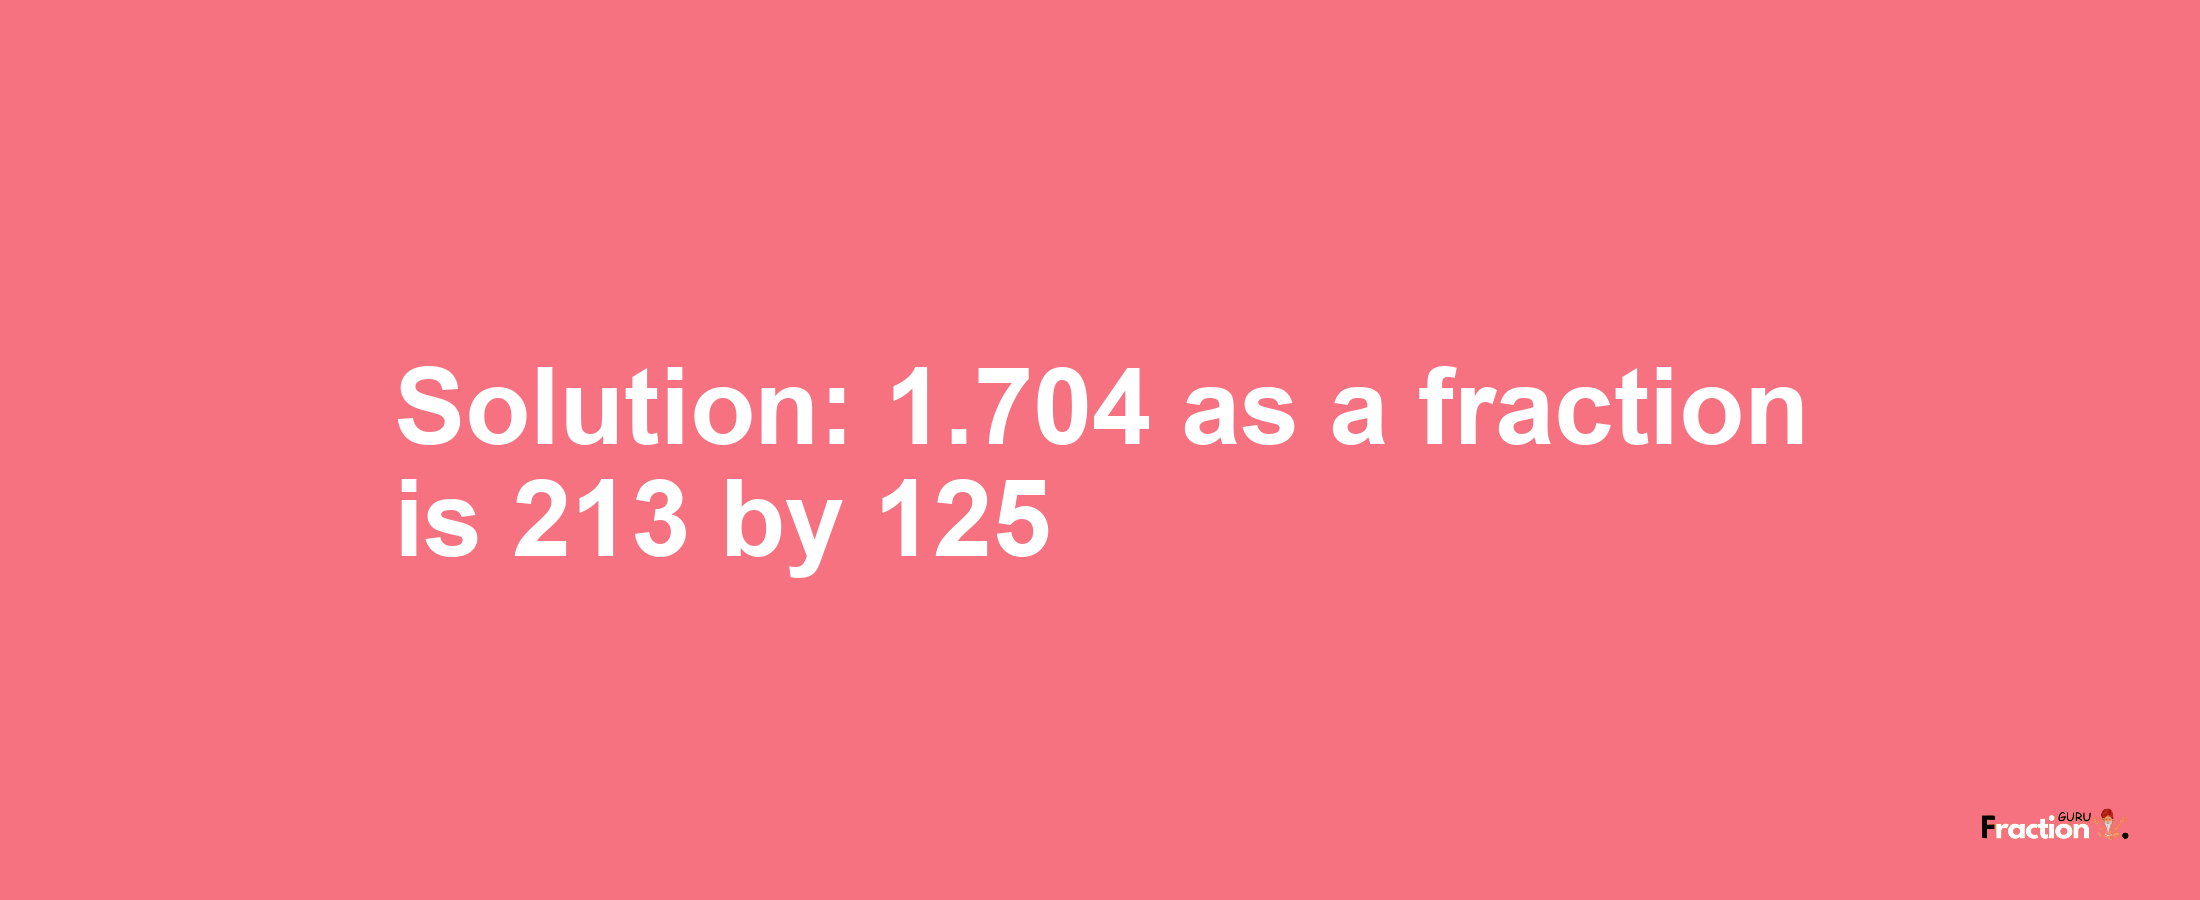 Solution:1.704 as a fraction is 213/125